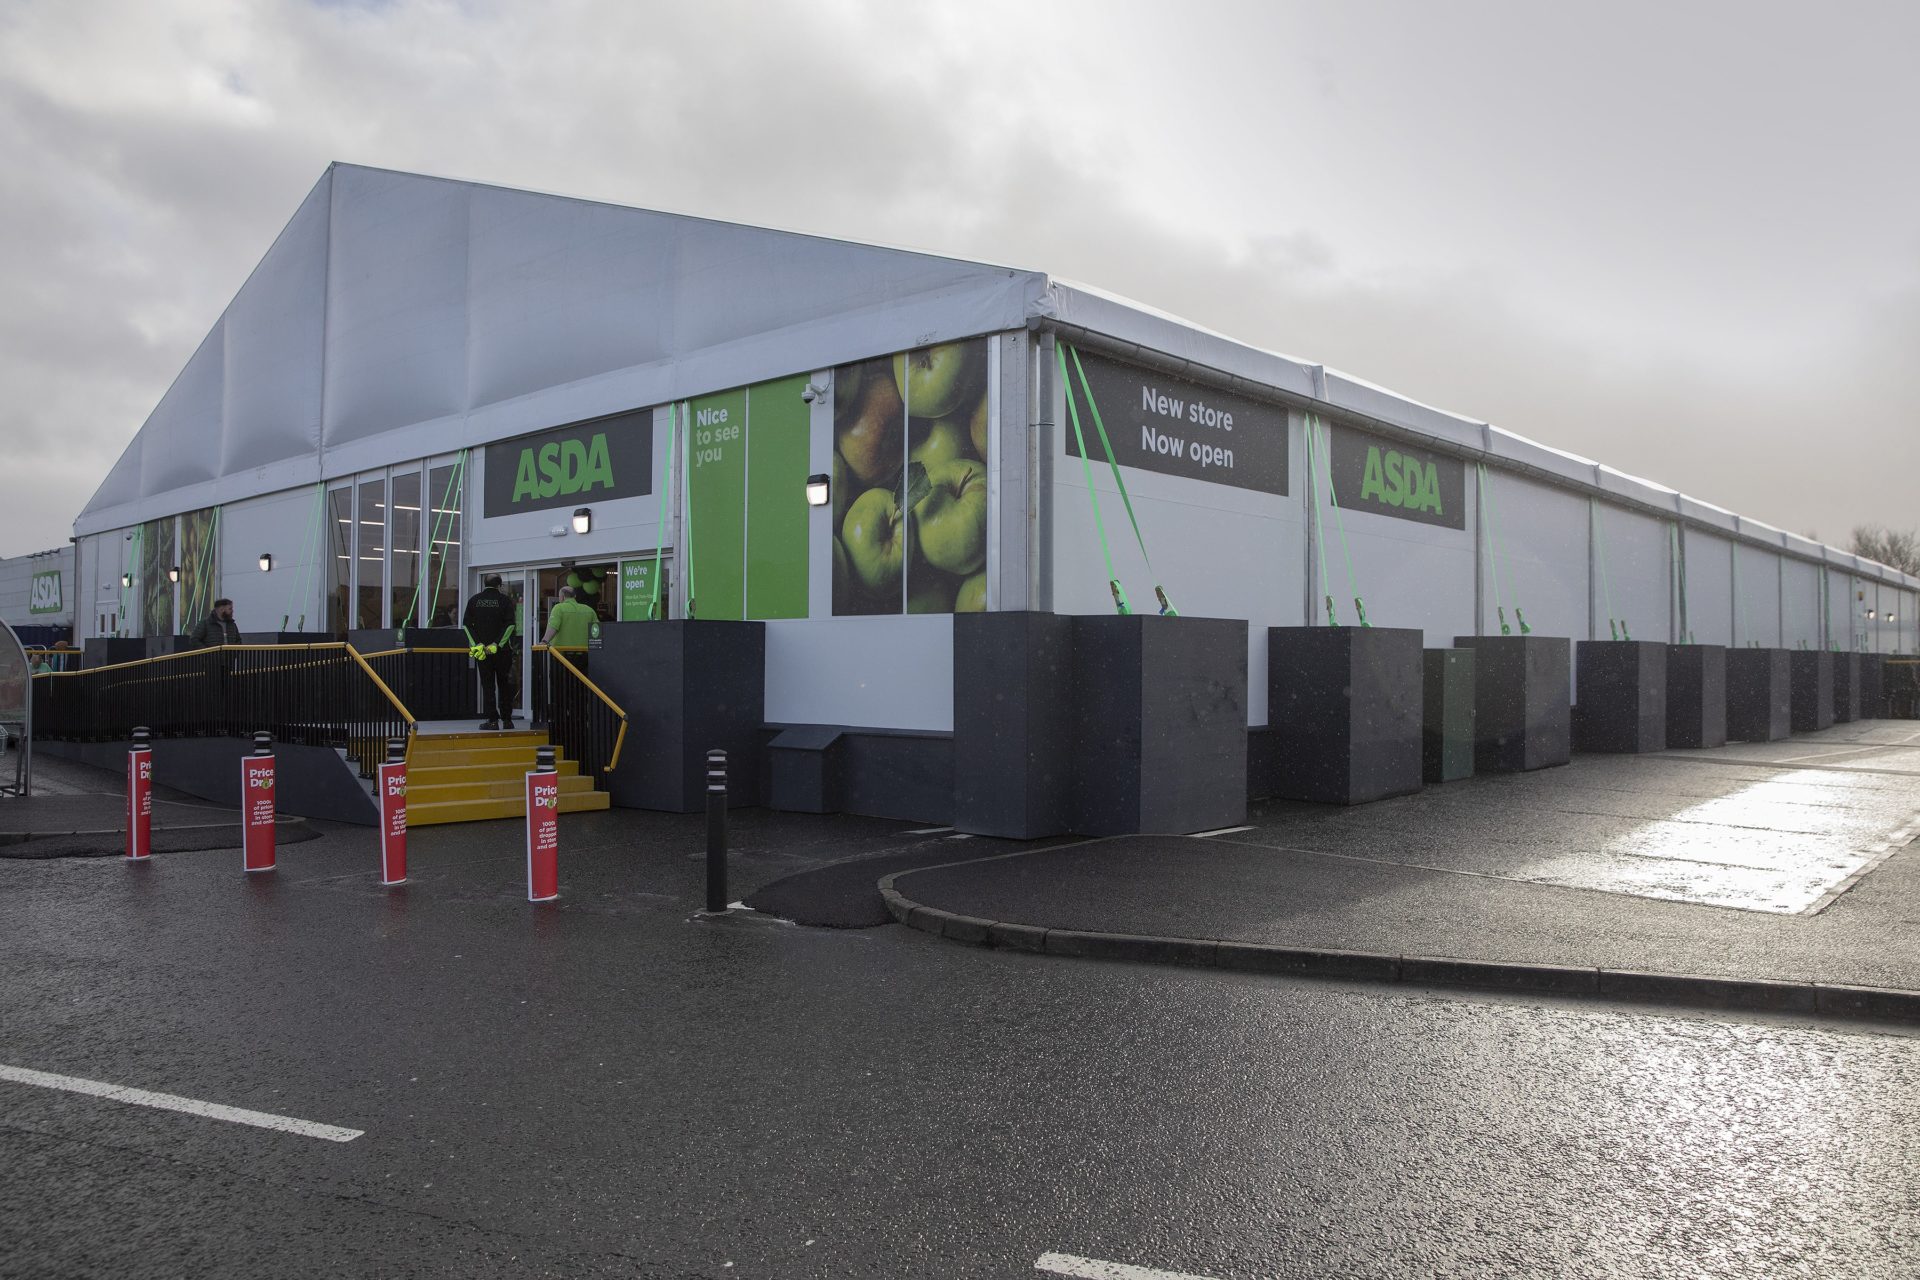 A temporary supermarket structure with Asda branding.